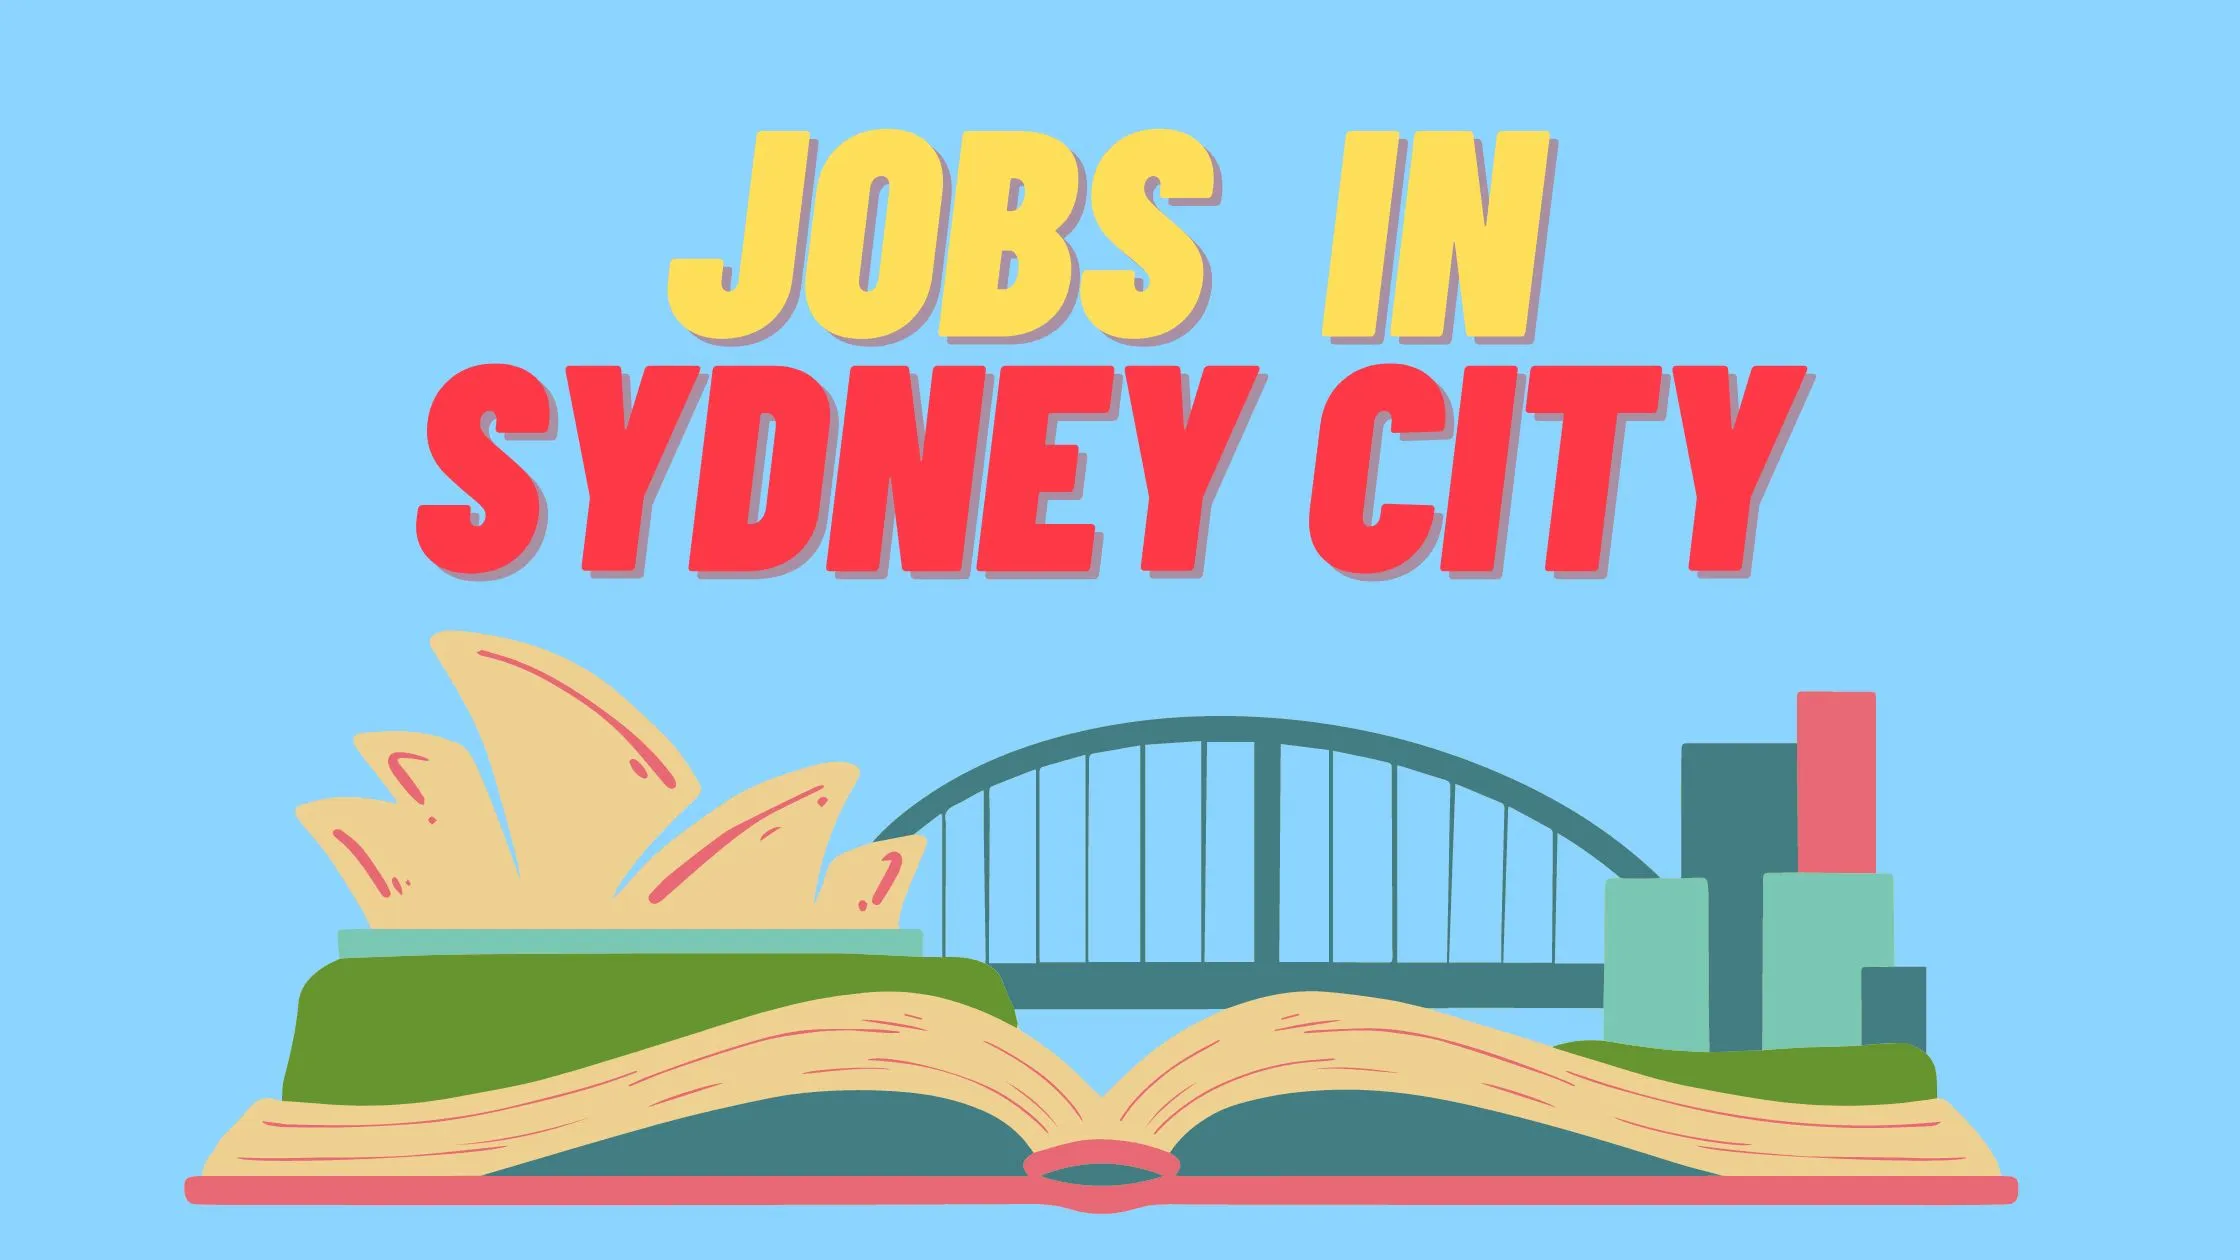 Job seekers! Are you looking for jobs in Sydney city?